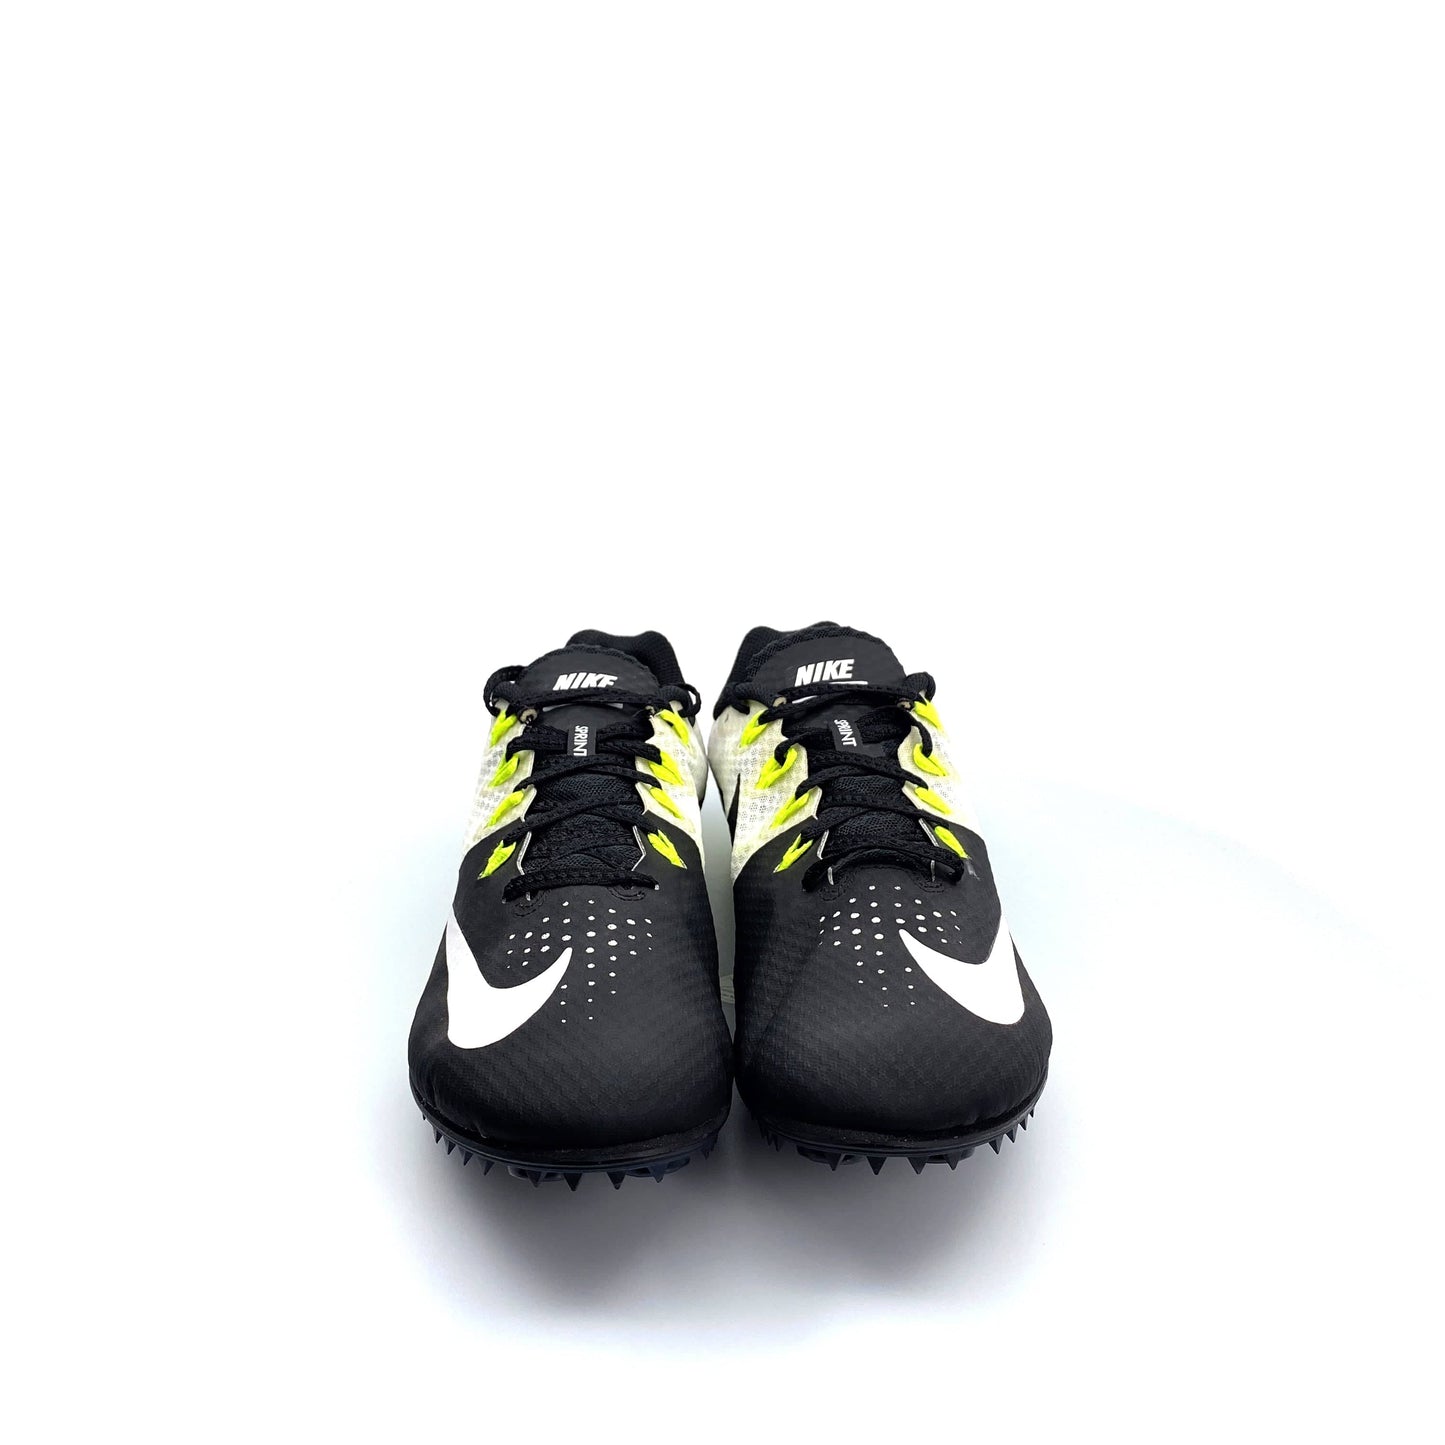 Nike Mens Rival S Size 13 Sprint Racing Track Shoes Black White 806554-010